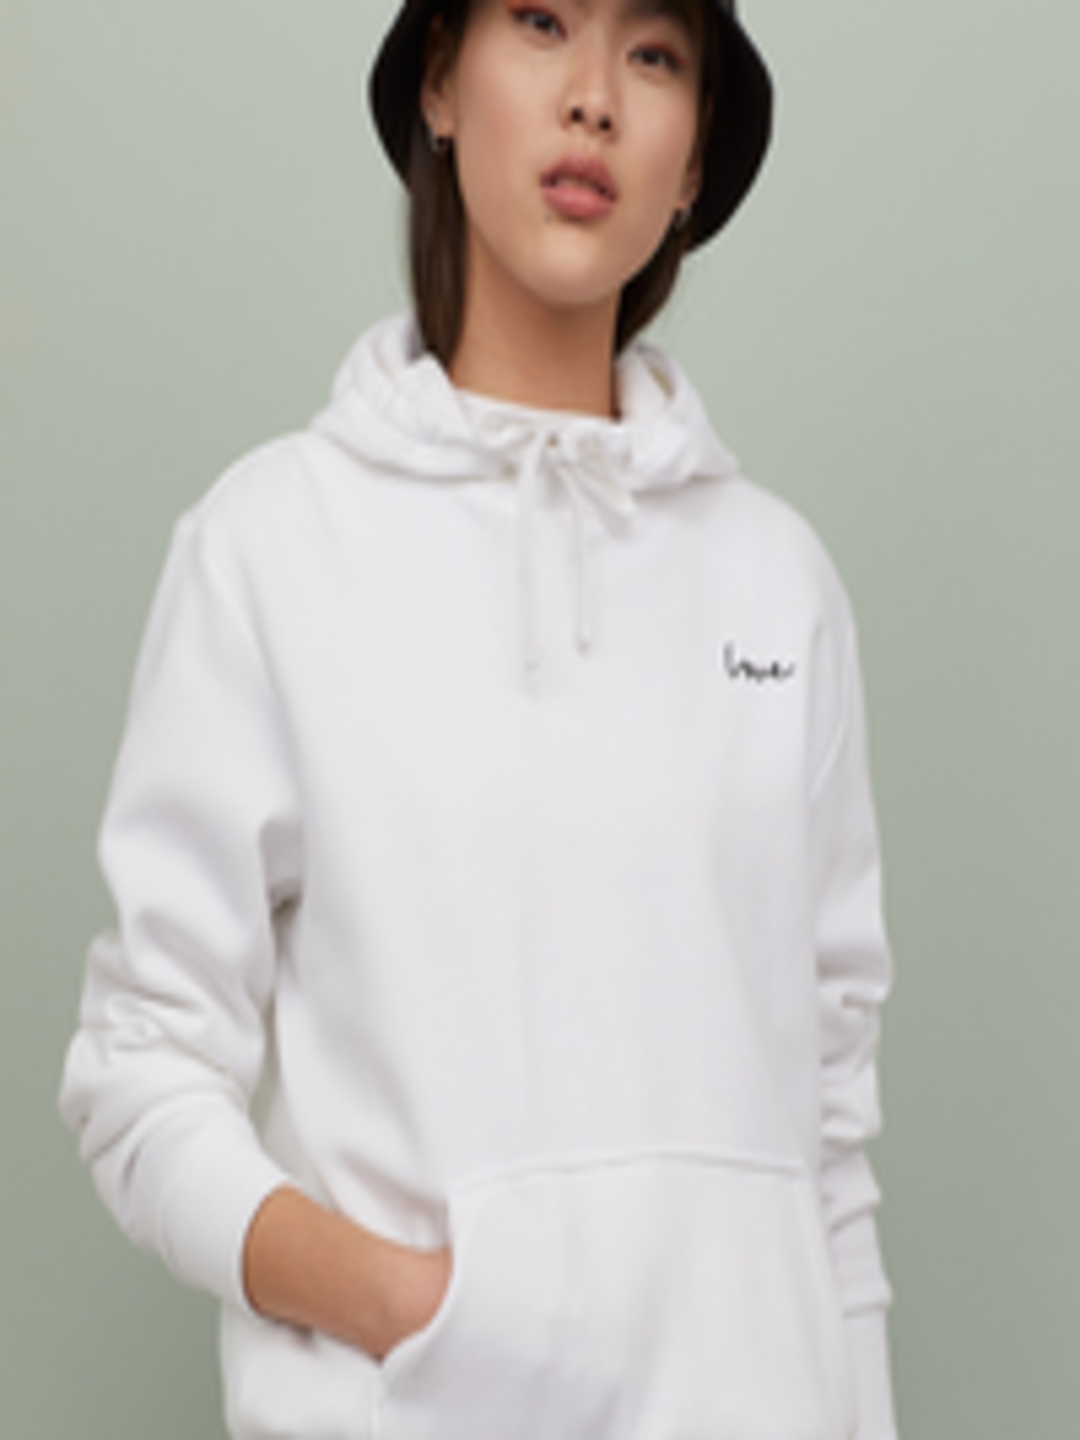 Buy H&M Women White Hooded Top With A Motif - Sweatshirts for Women ...